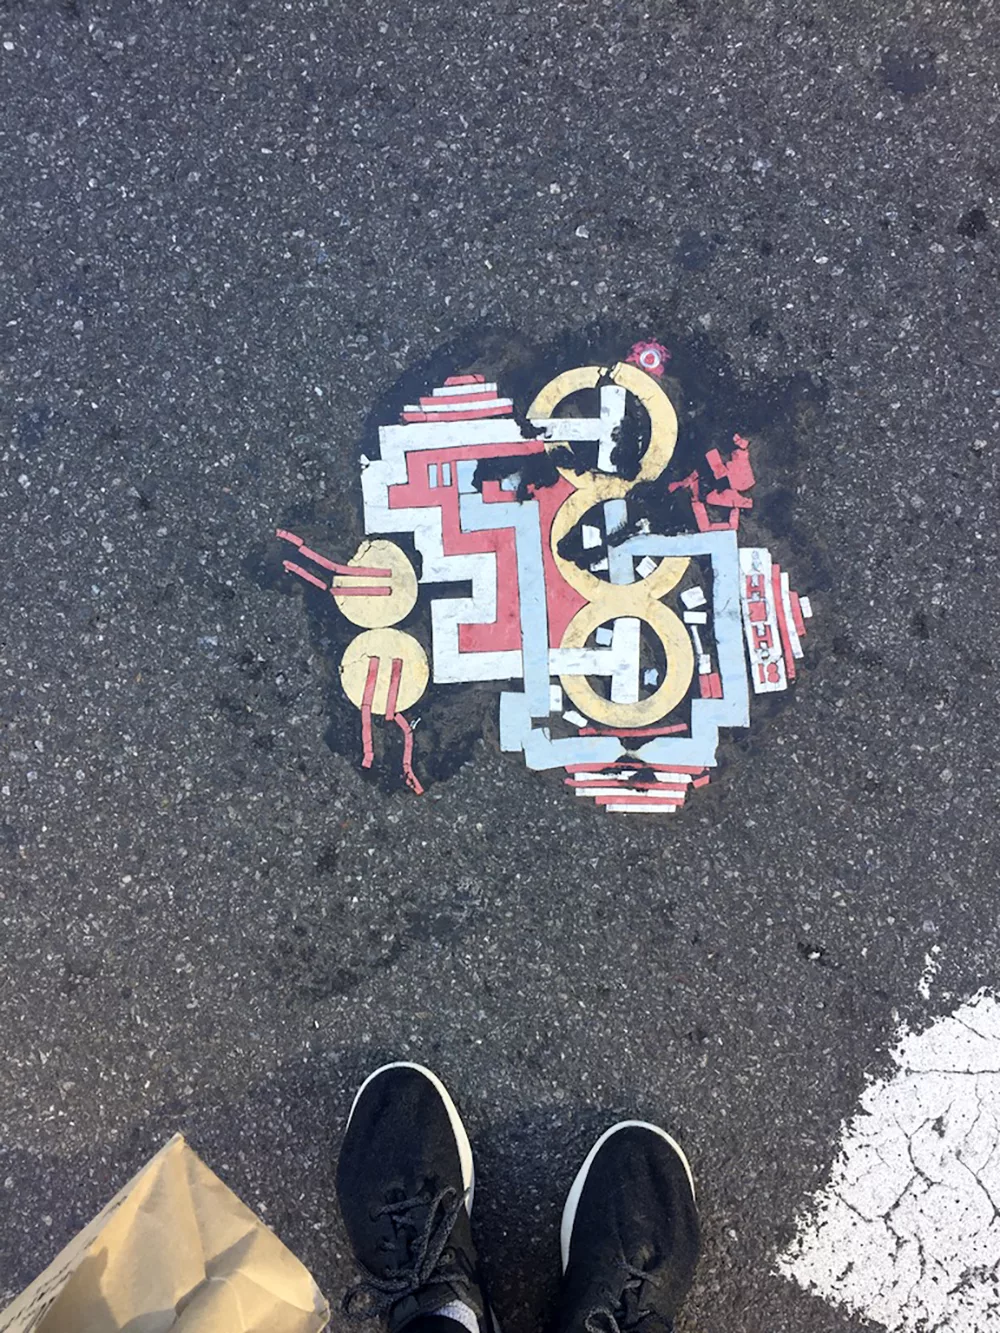 Pothole in New York City filled in with mosaic art